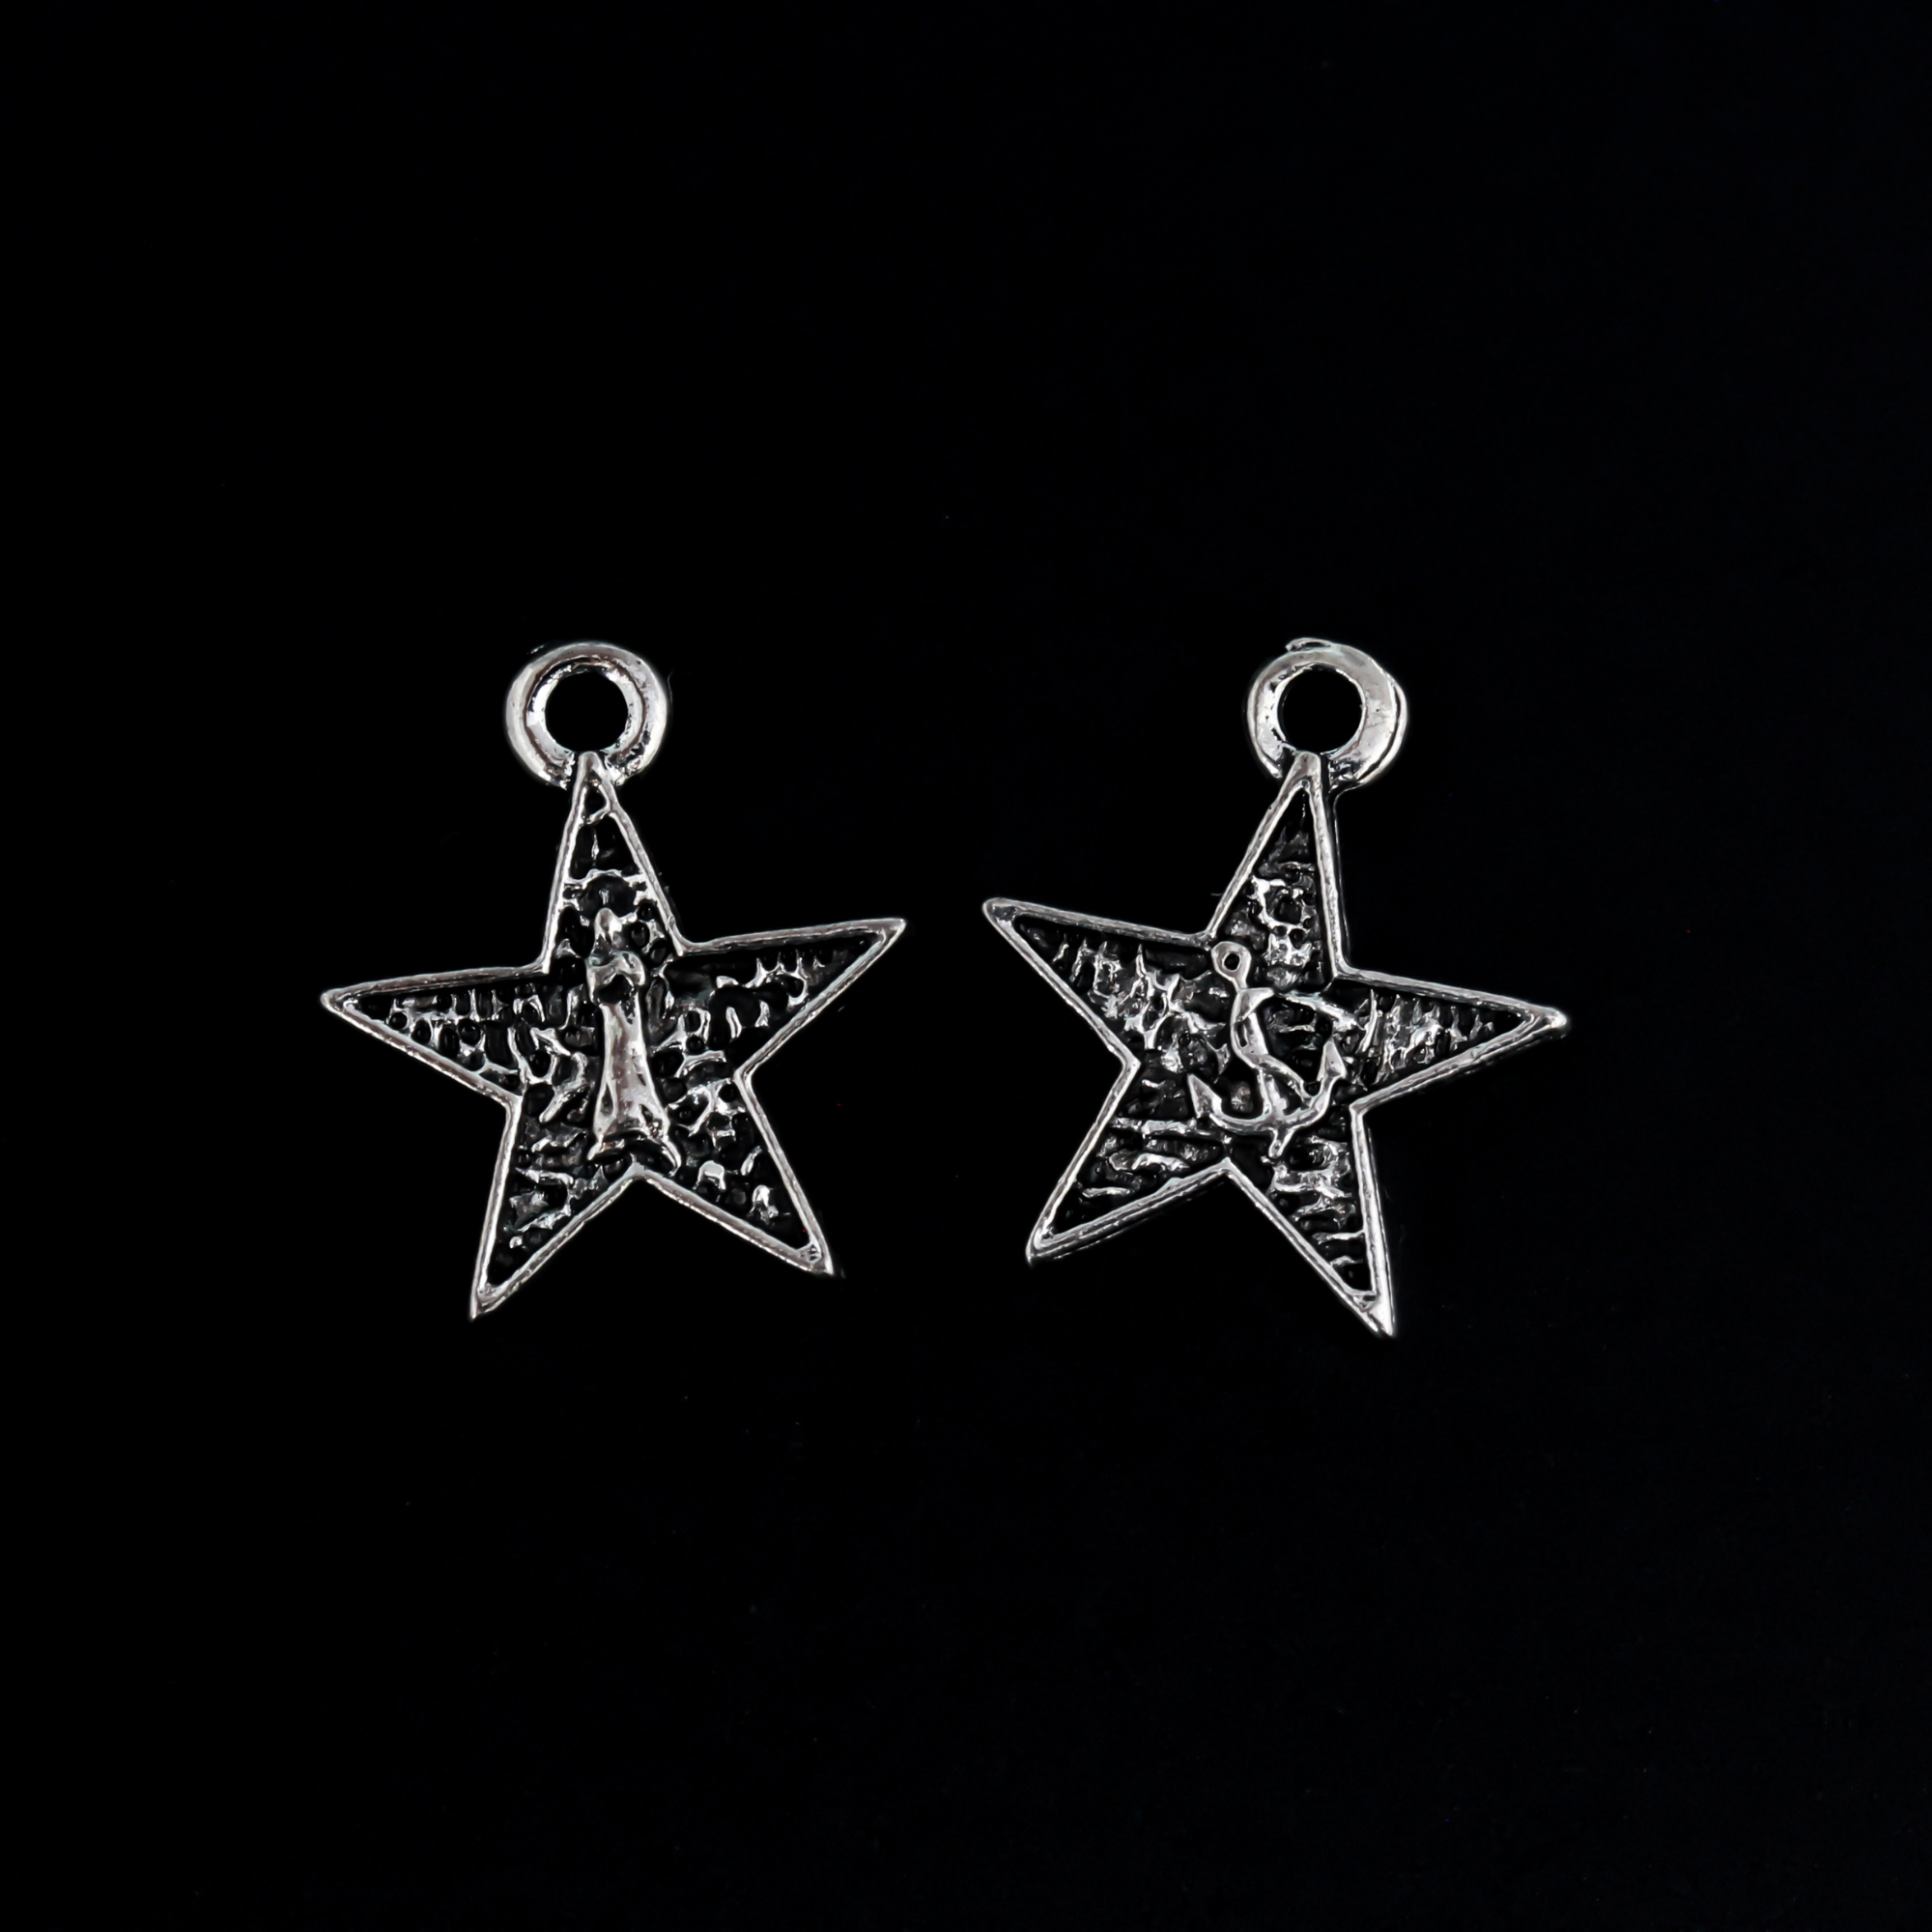 Small star-shaped charms that feature The Blessed Virgin Mary as Our Lady of the Sea on the front side and an anchor on the backside.